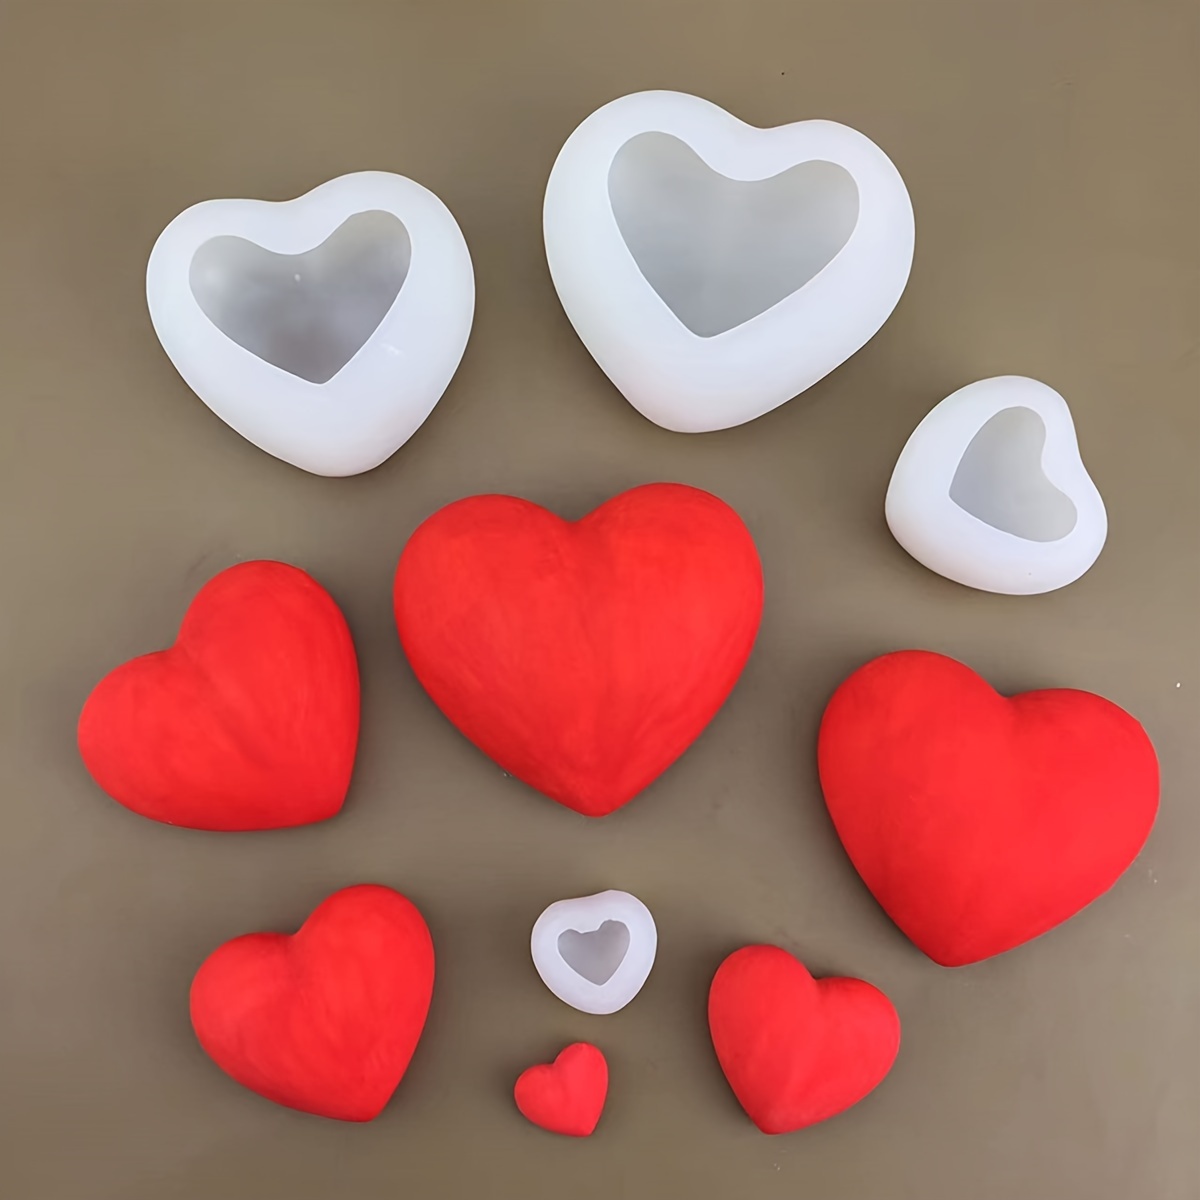 

2pcs, Love Heart Shaped Fondant Molds, 3d Silicone Mold, Candy Molds, Craft Molds, For Diy Cake Decorating Tool, Baking Tools, Kitchen Accessories, Valentine's Day Decor